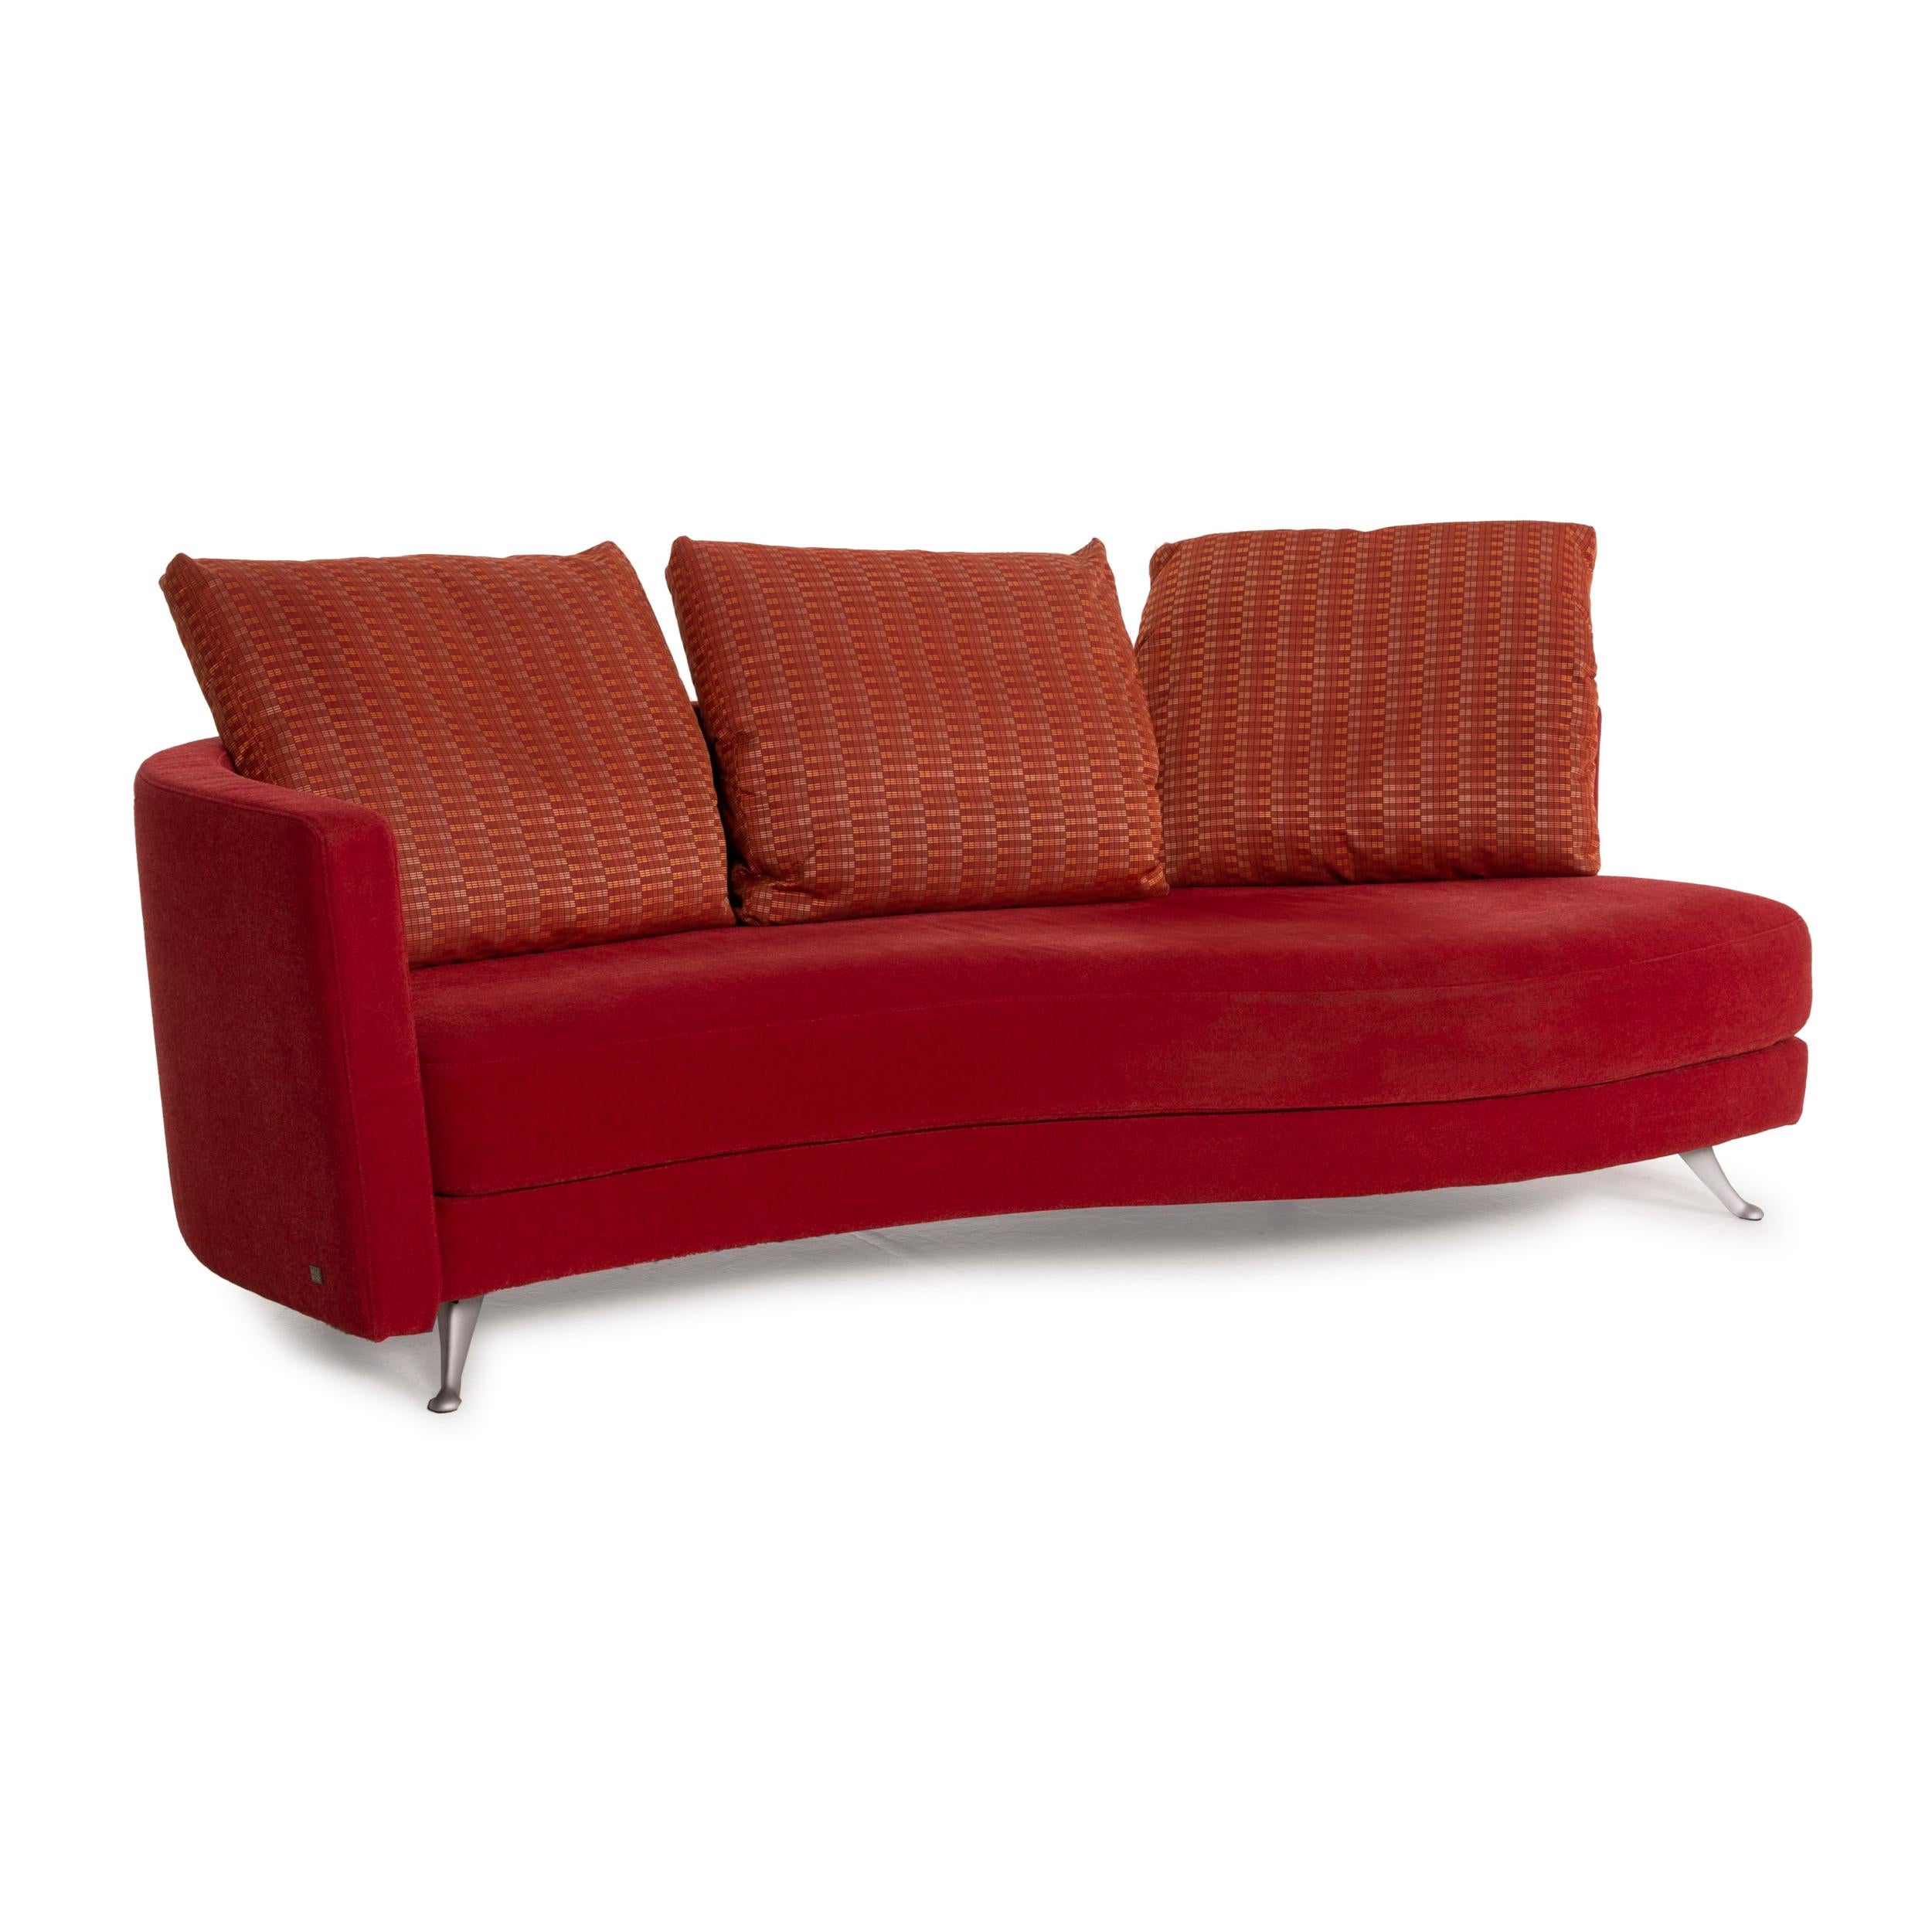 Contemporary Rolf Benz 2500 Red Three-Seater Fabric Sofa Incl. Ottoman Set